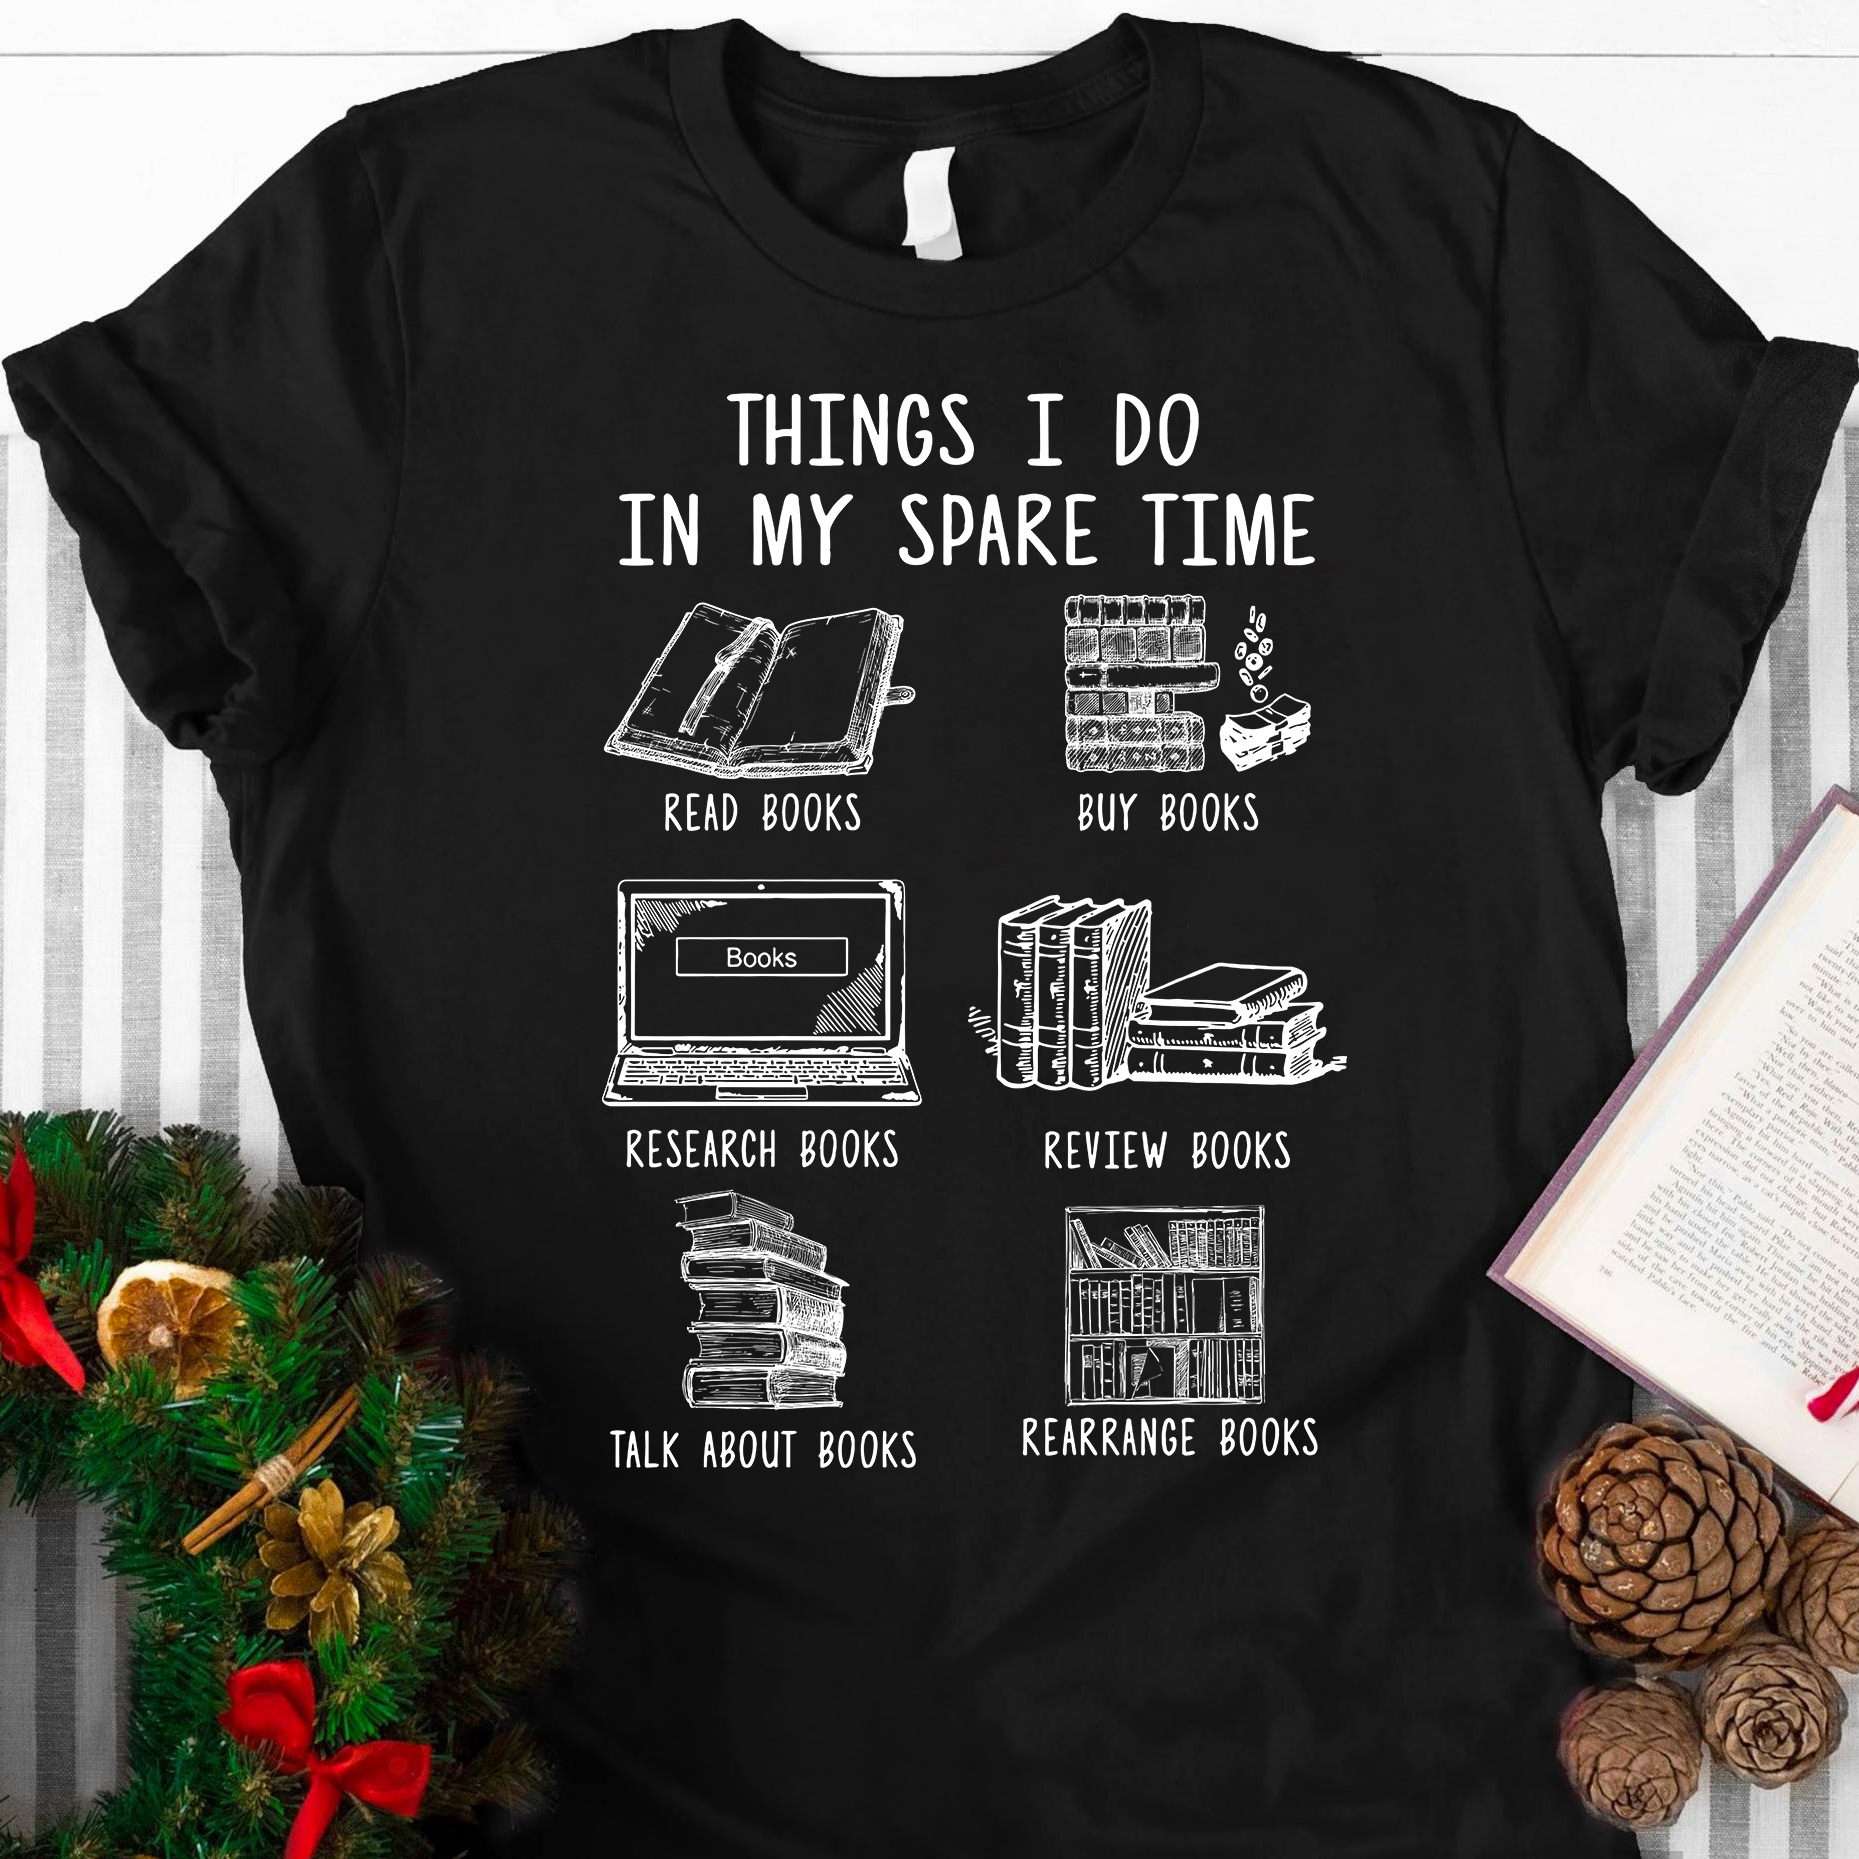 Things I do in my spare time - Read books, buy books, research books, T-shirt for bookaholic